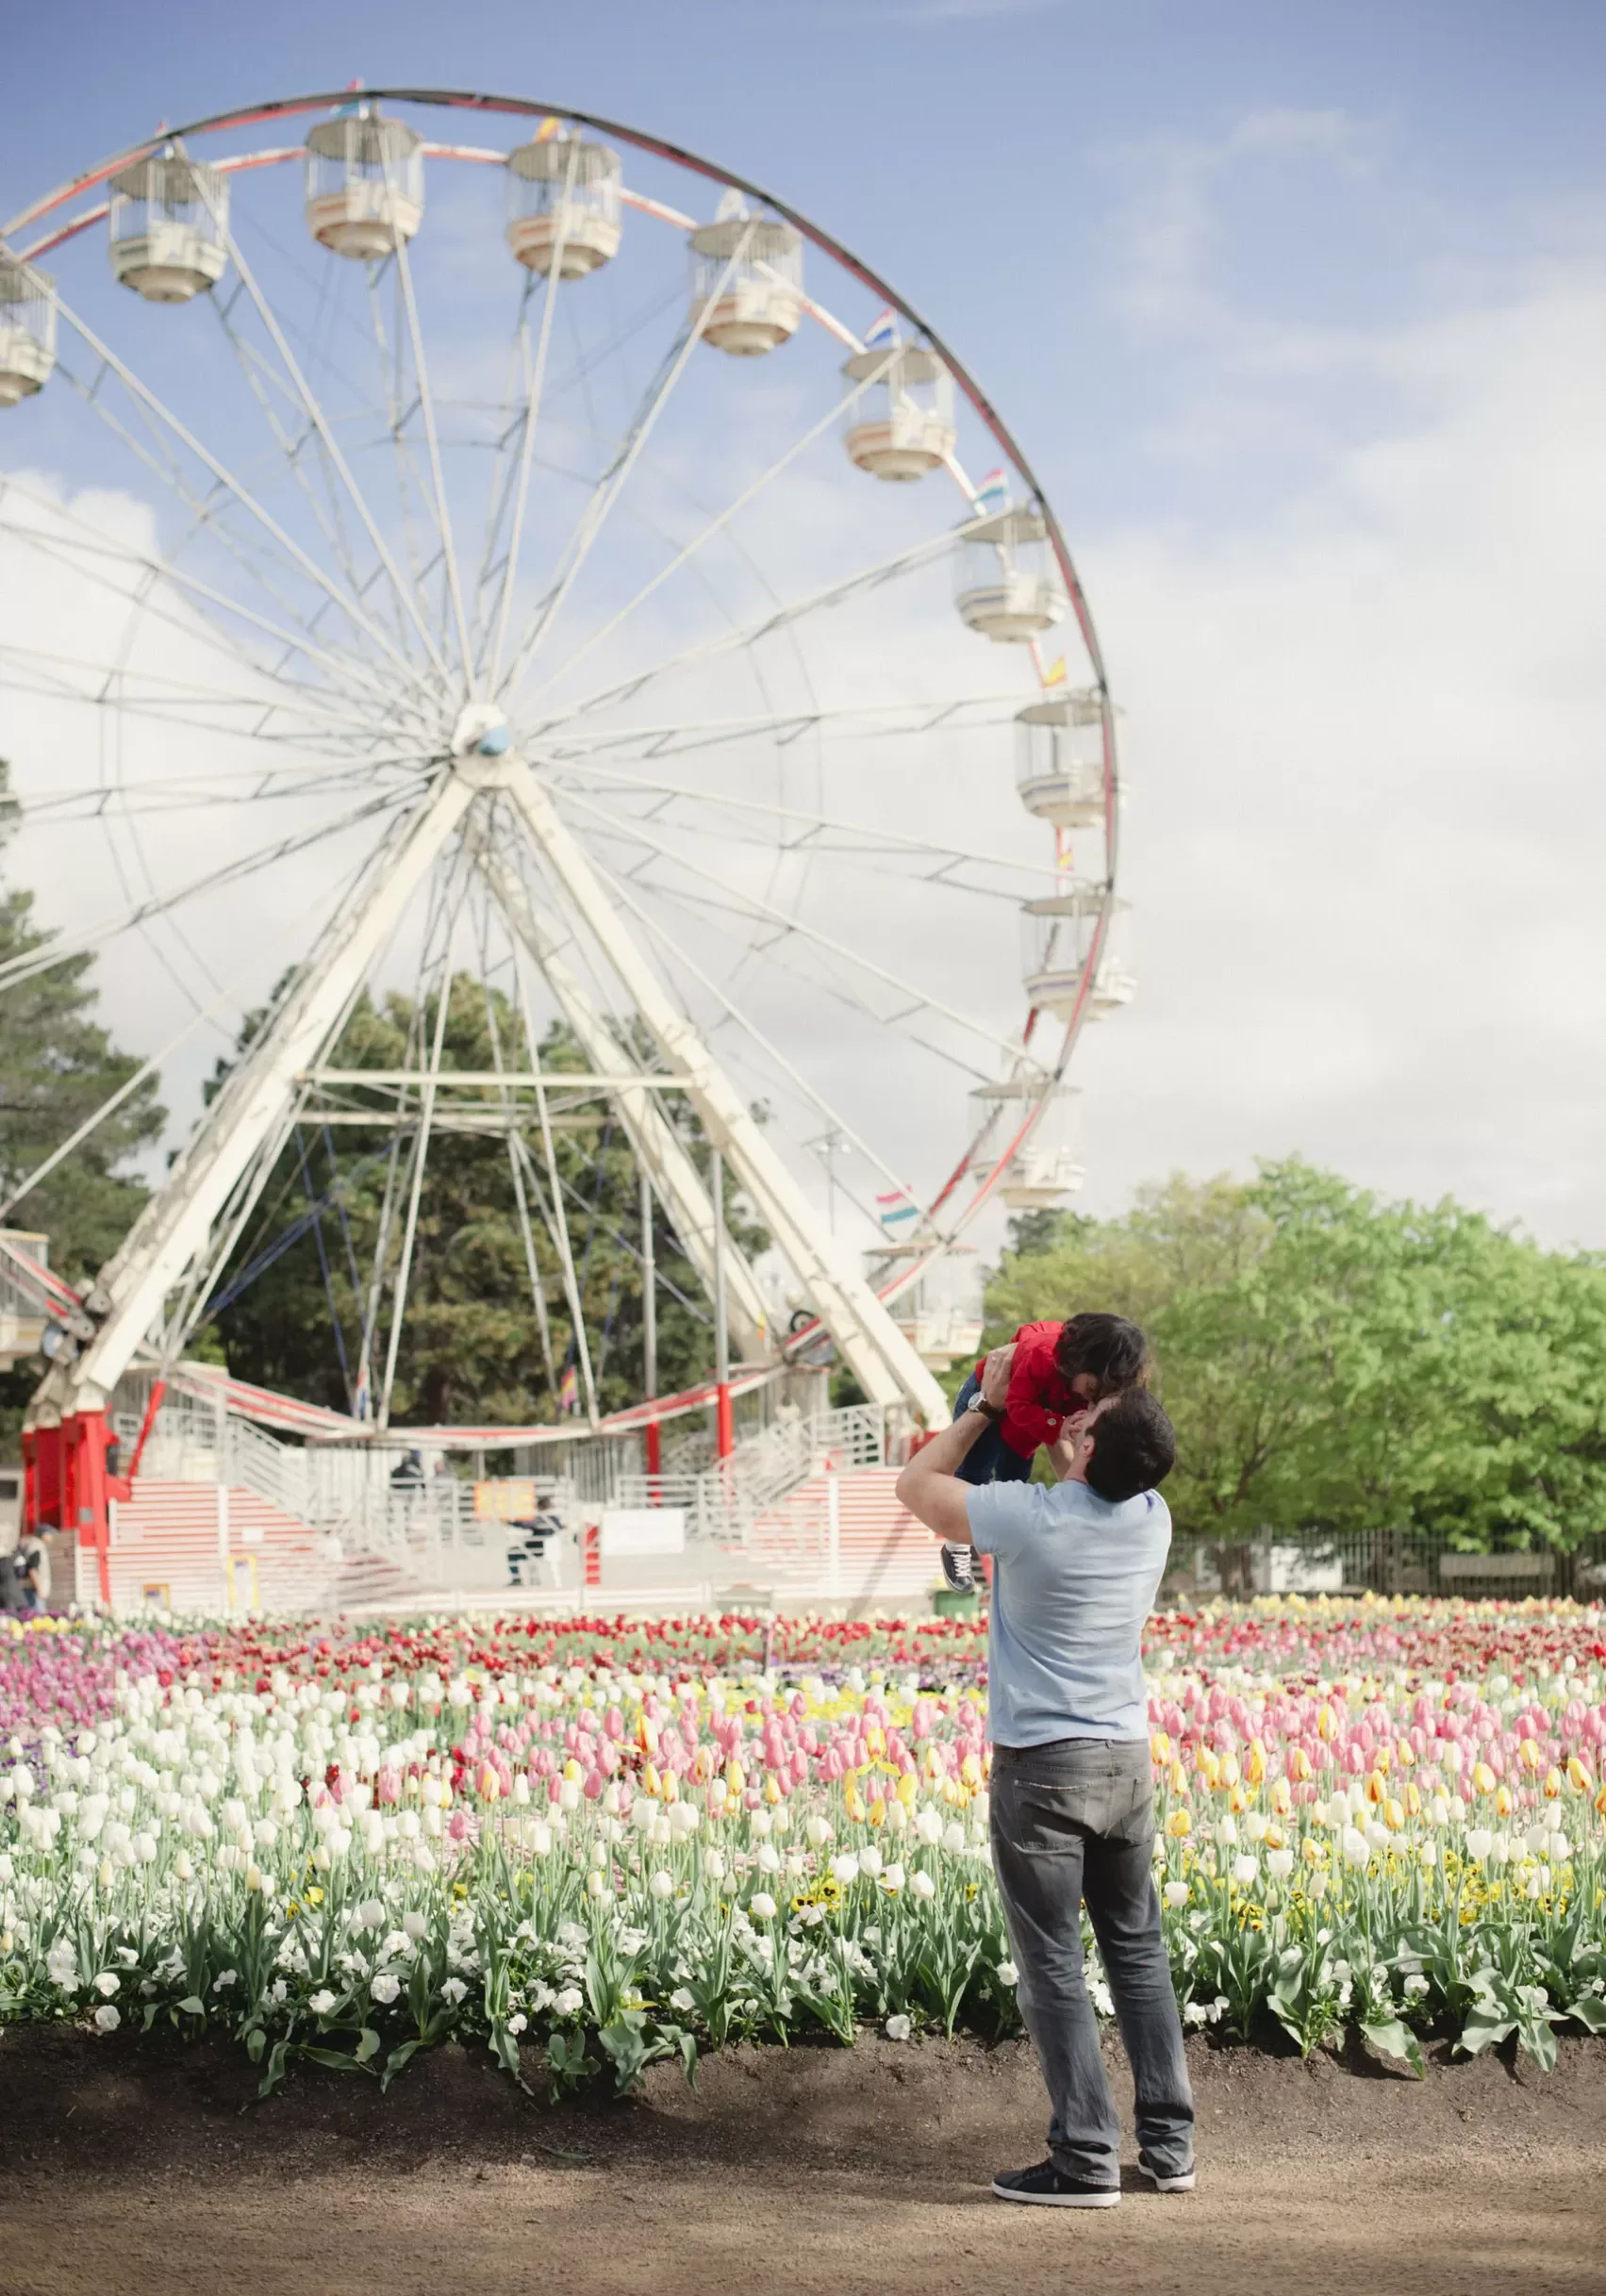 Celebrate spring this year at Canberra's Tuilp Festival - 📸 VisitCanberra